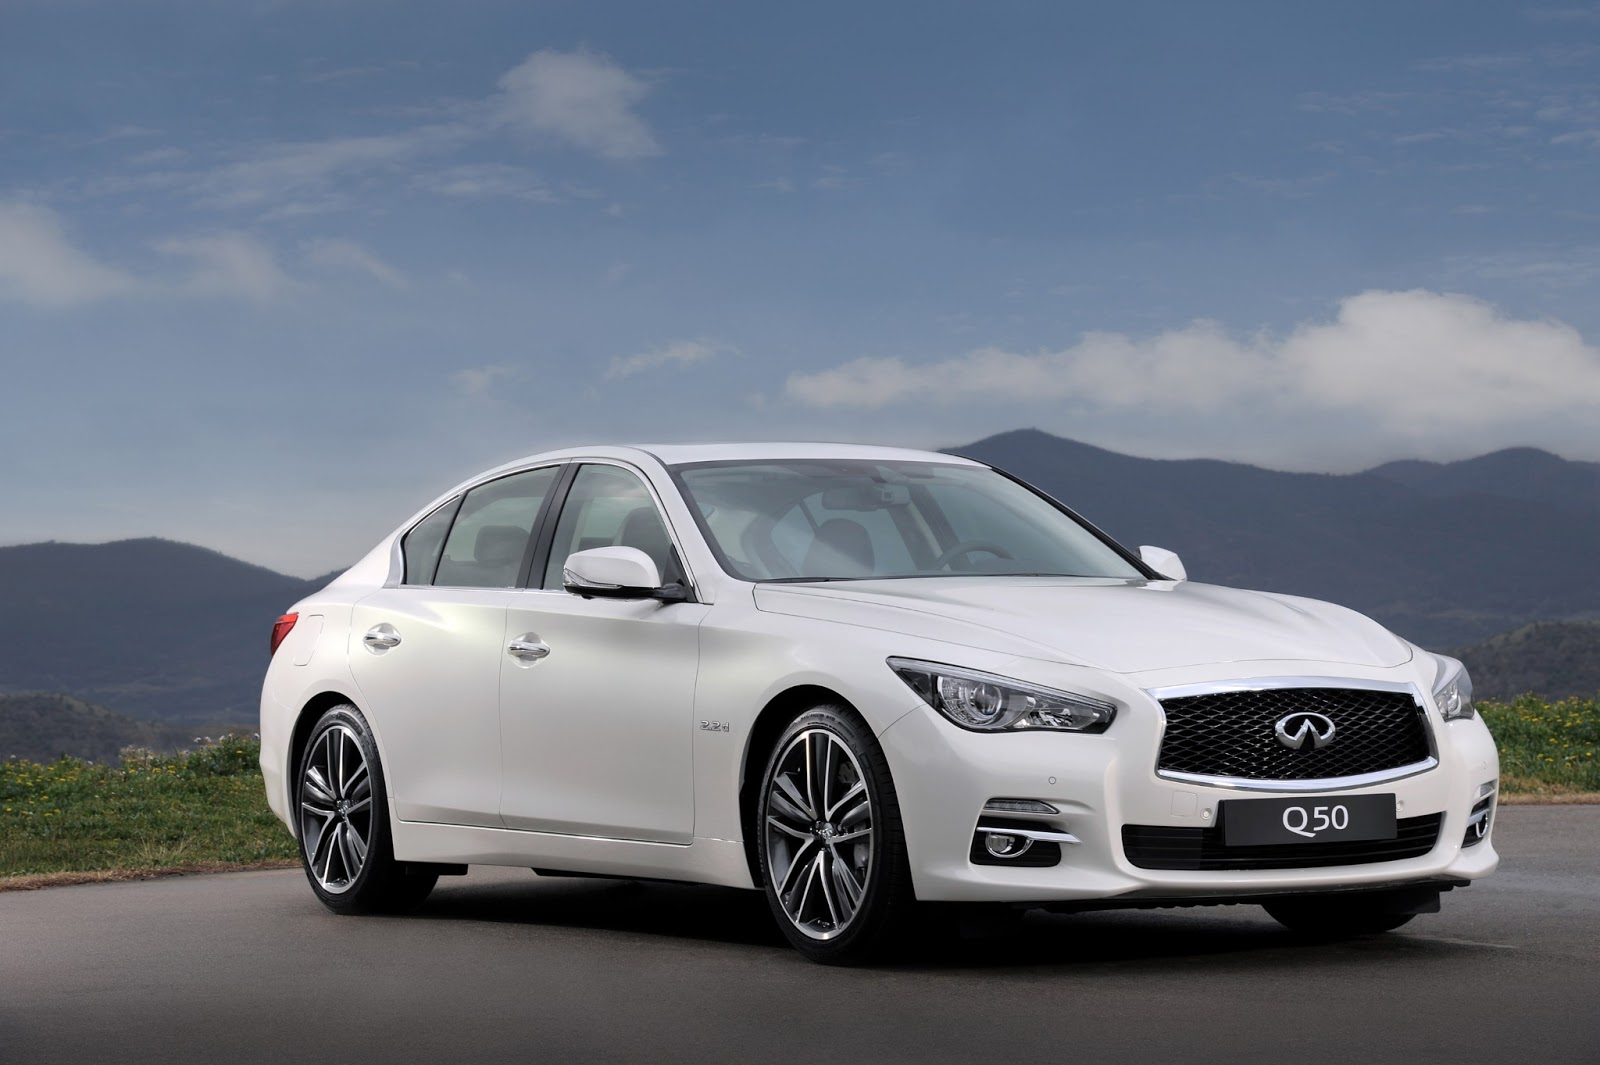 2014 Infiniti Q50 Reviews and Prices